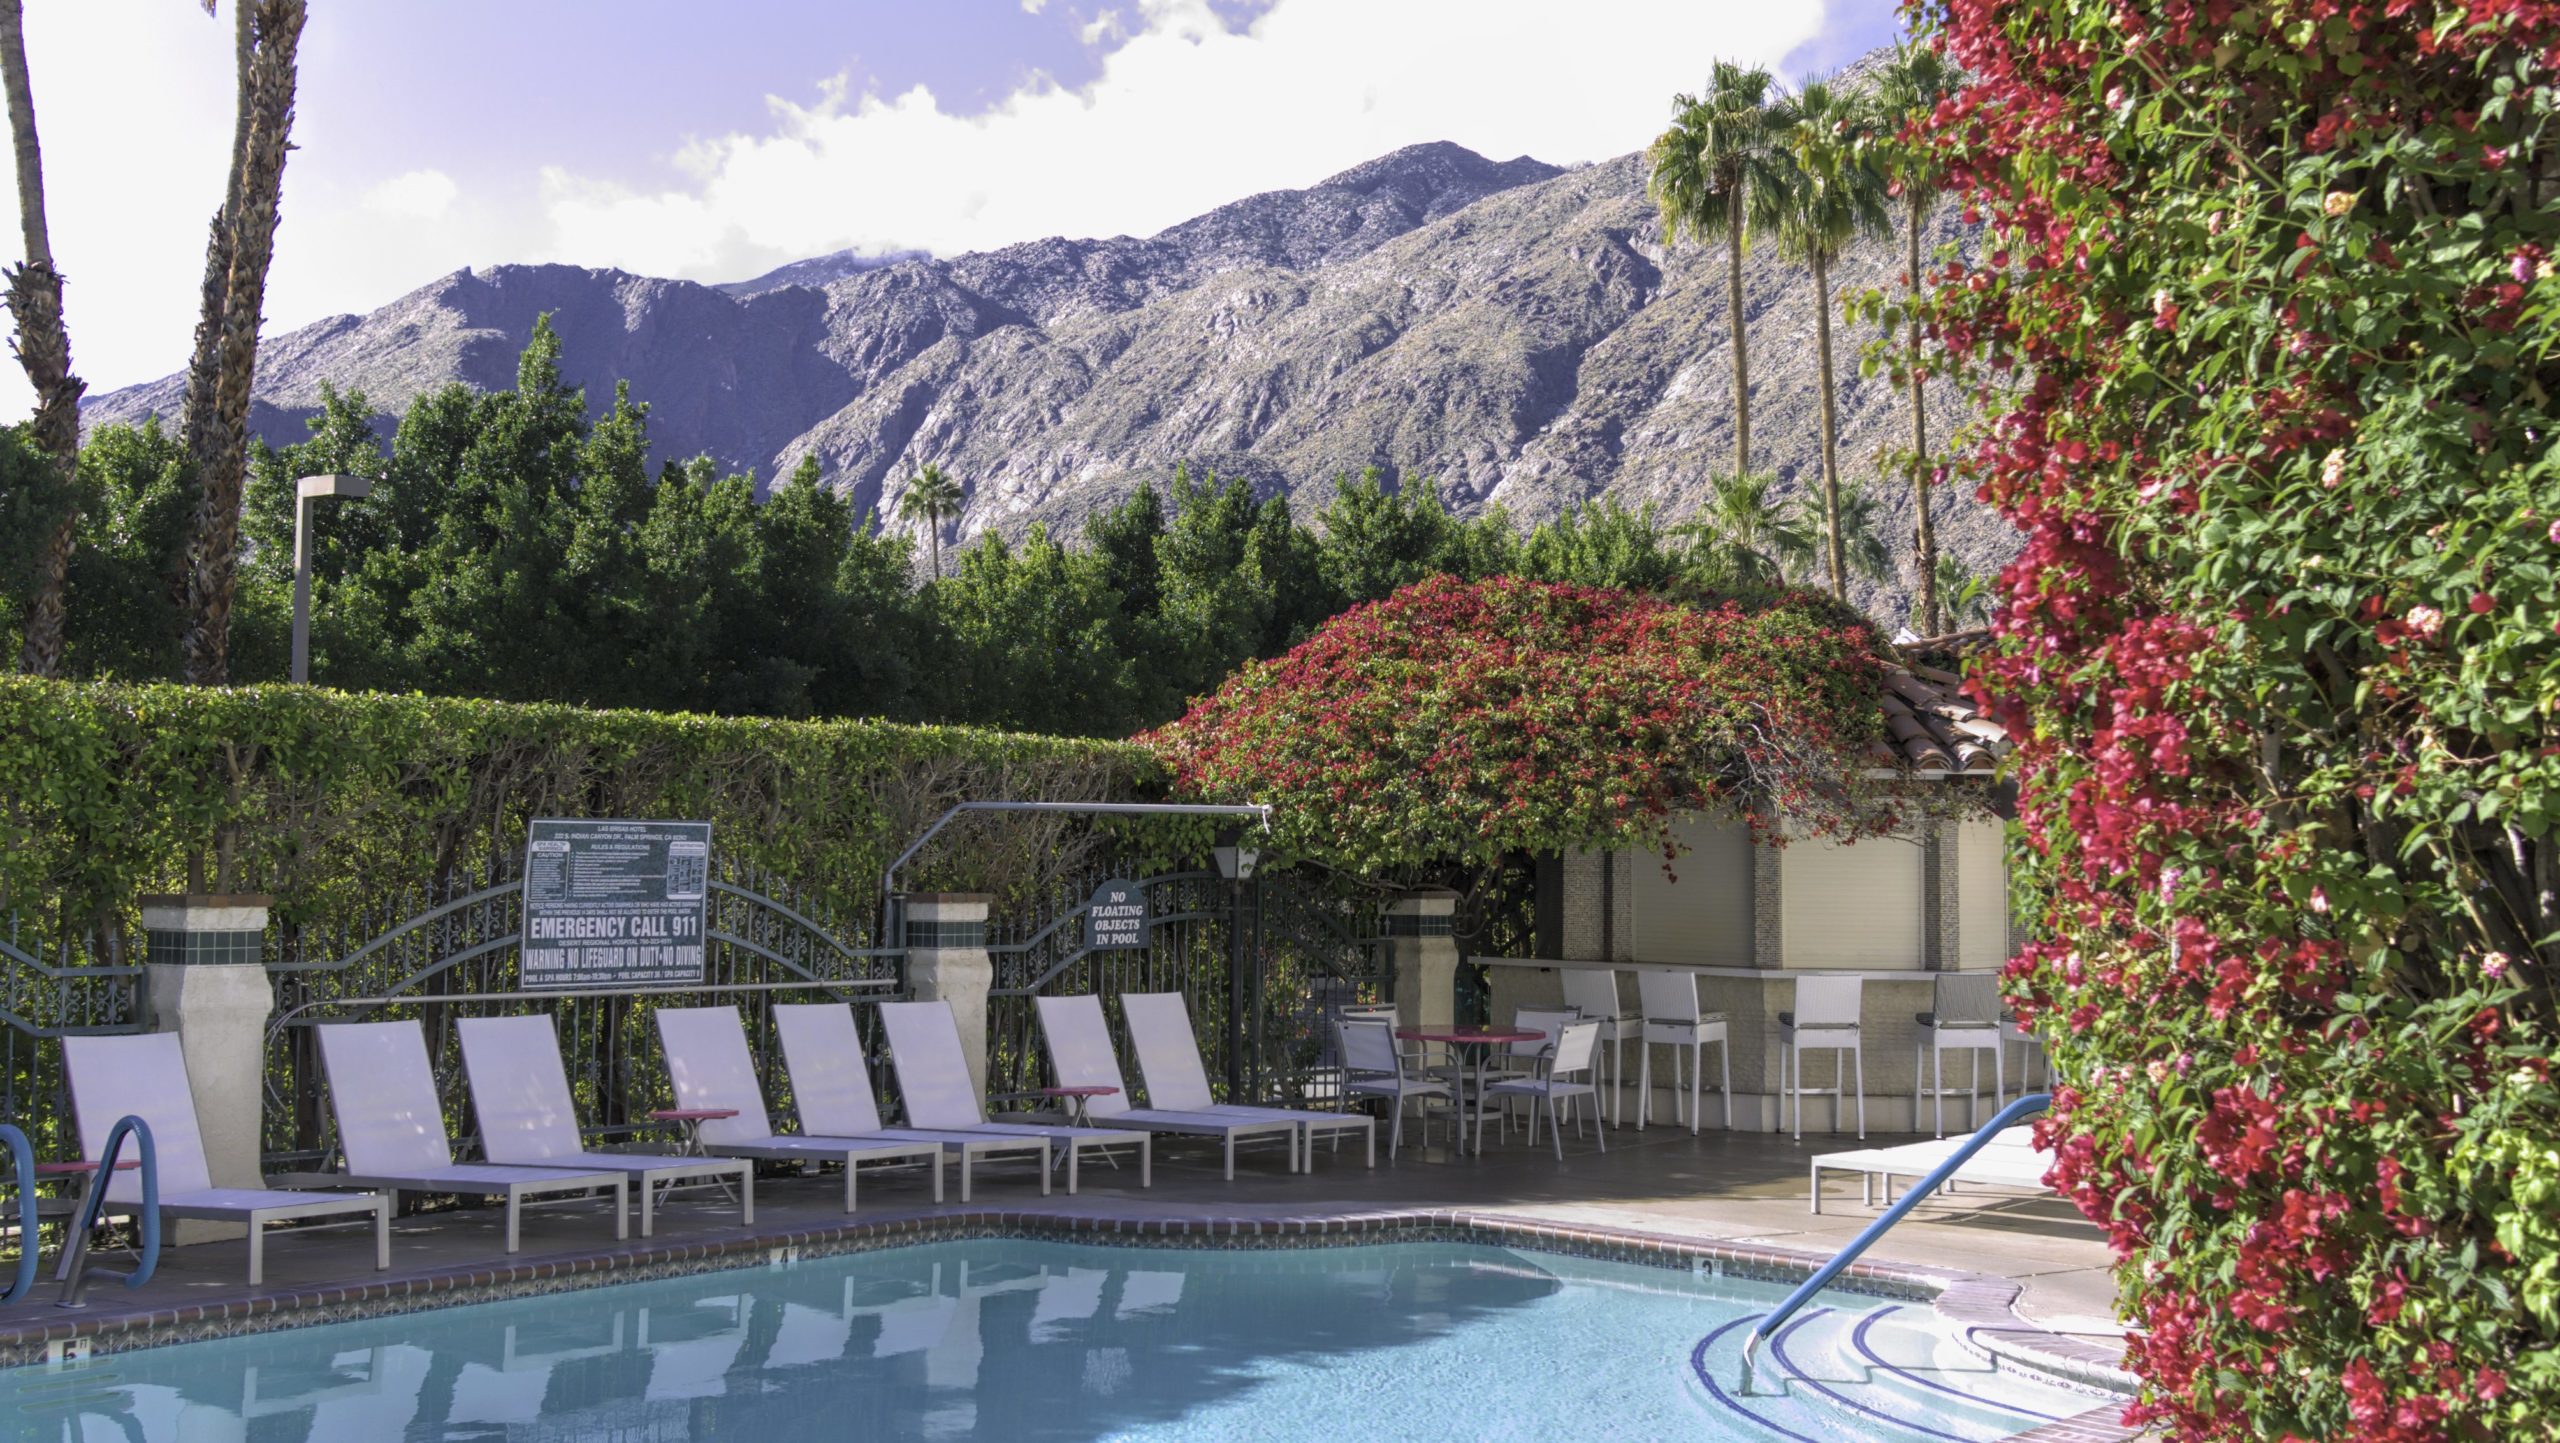 a swimming pool with lounge chairs and colorful bushes around it and mountains in the background